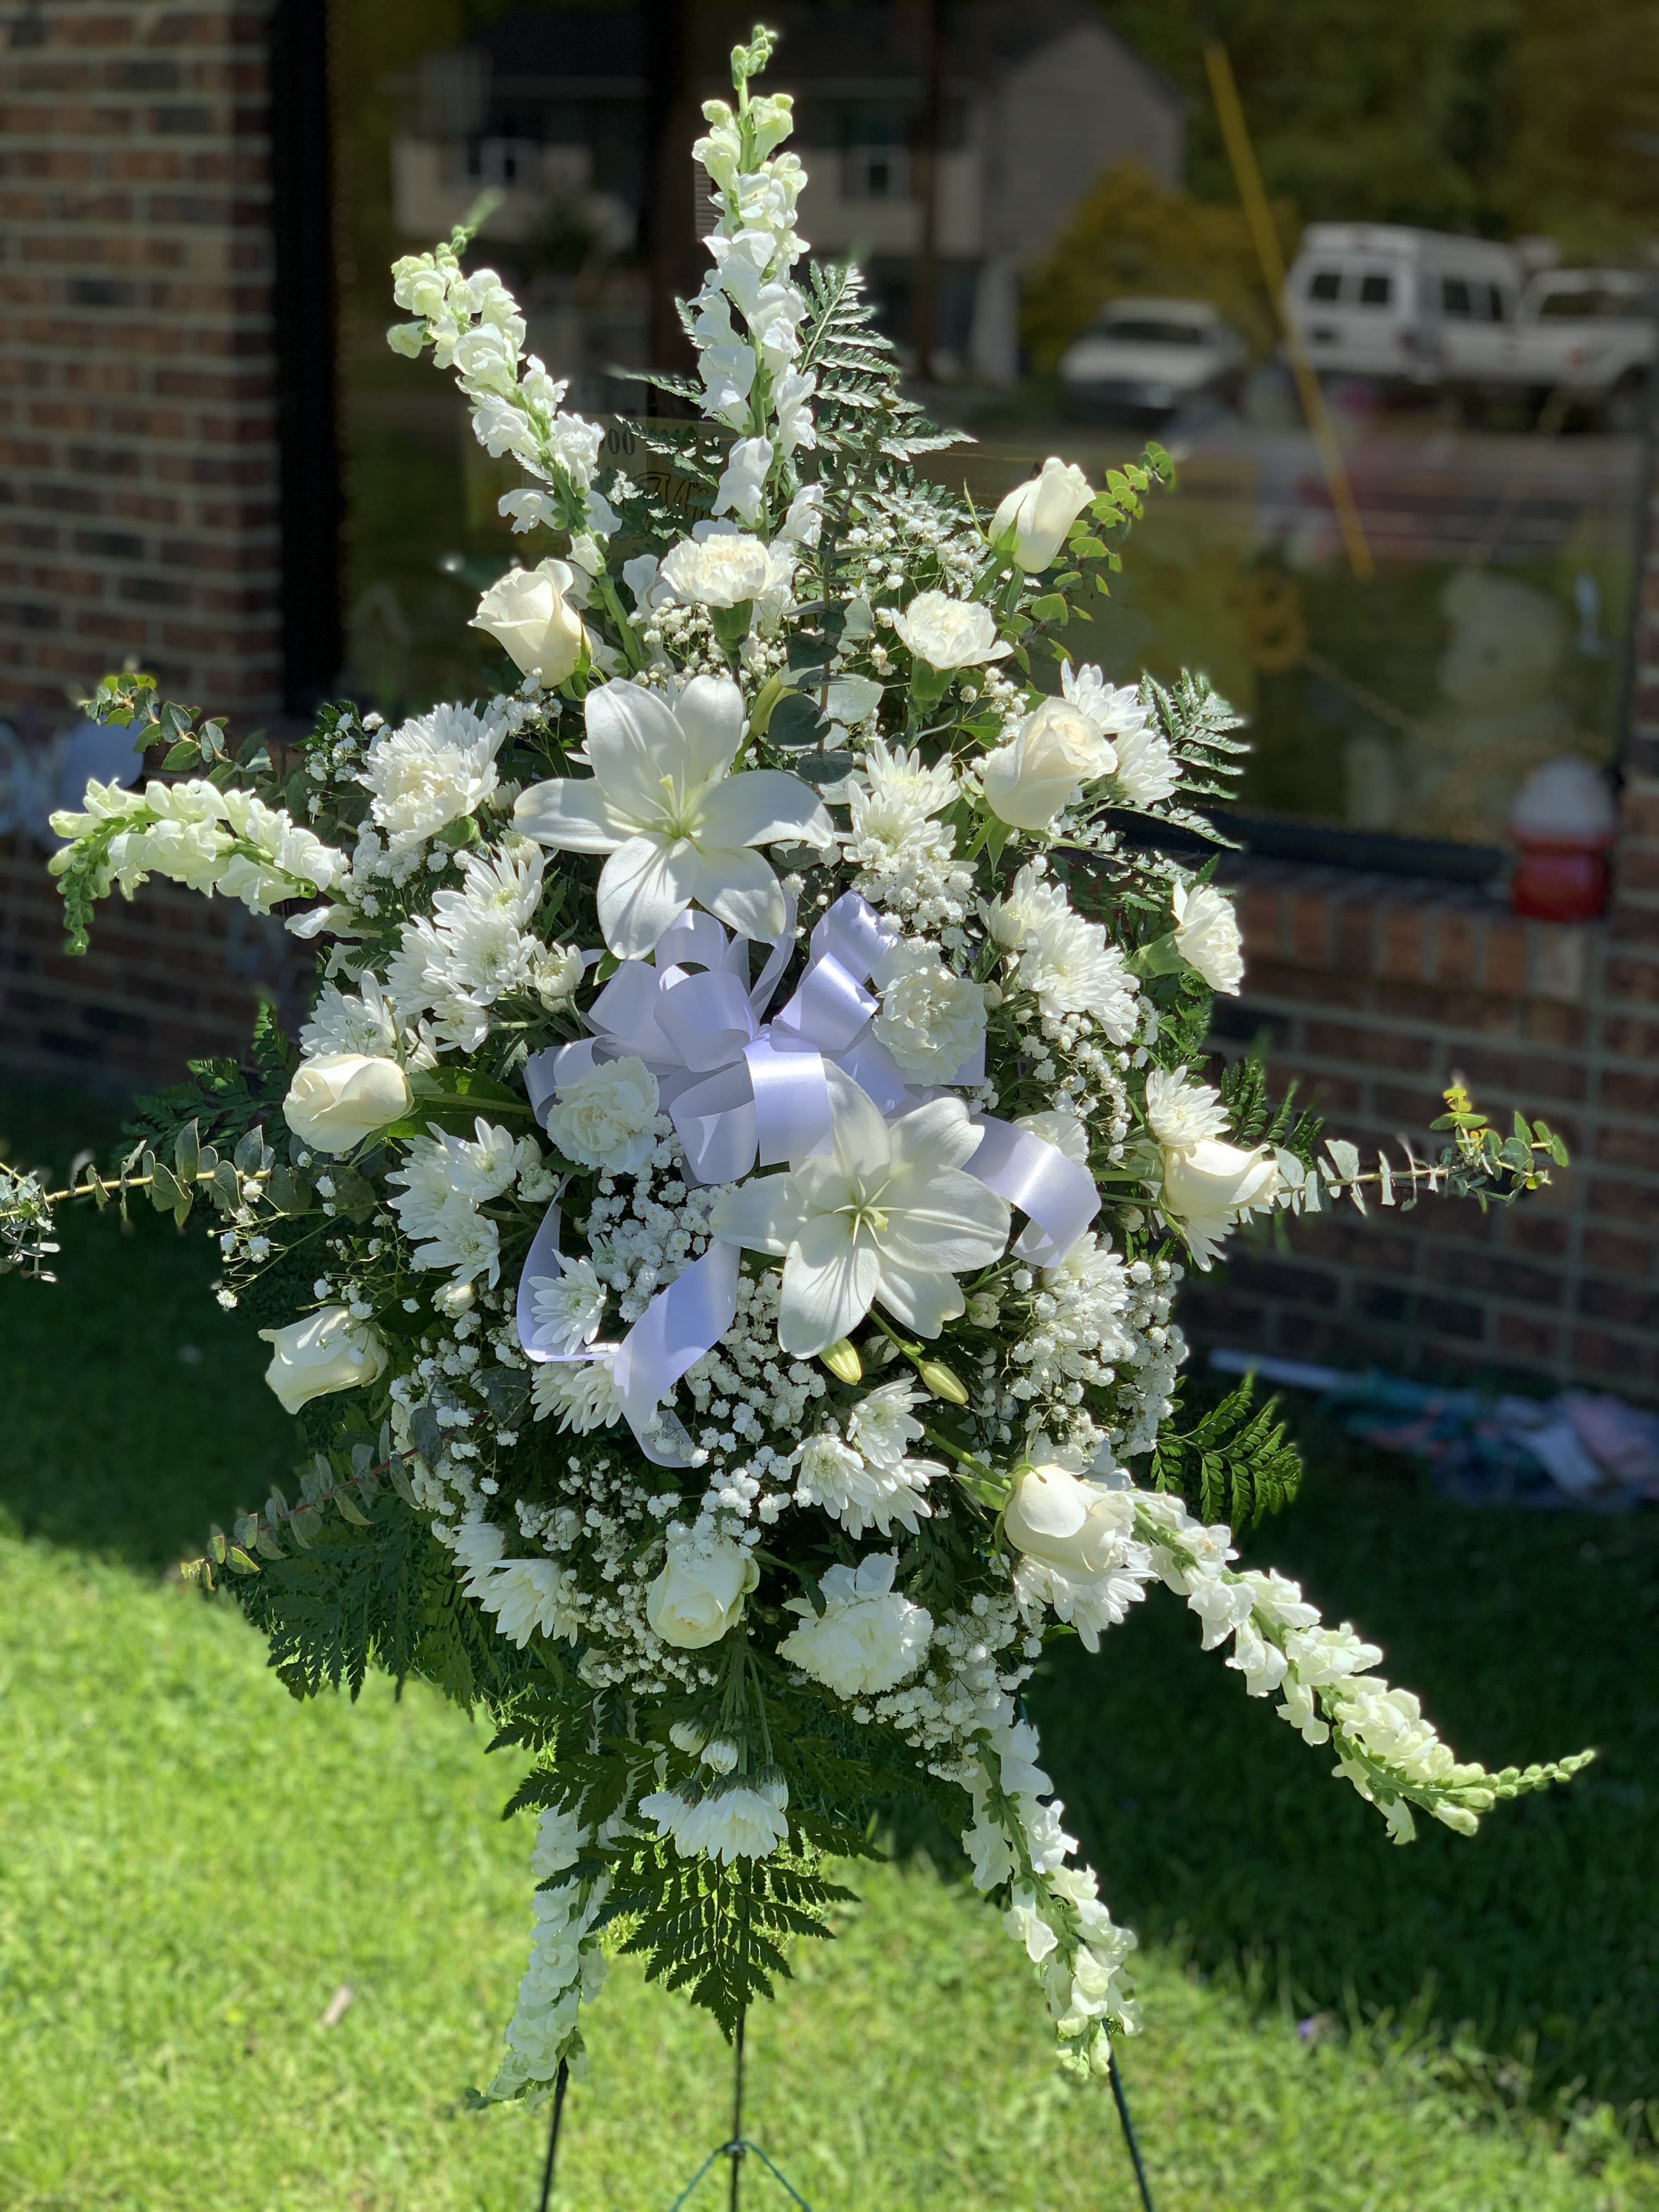 All White Standing Spray  - White flowers have a peacefulness to them, bringing hope and light during a time of loss.  Designed with an abundance of pristine white blooms for a lush, full presentation. Let it be a grand and memorable tribute to one who was loved so dearly.